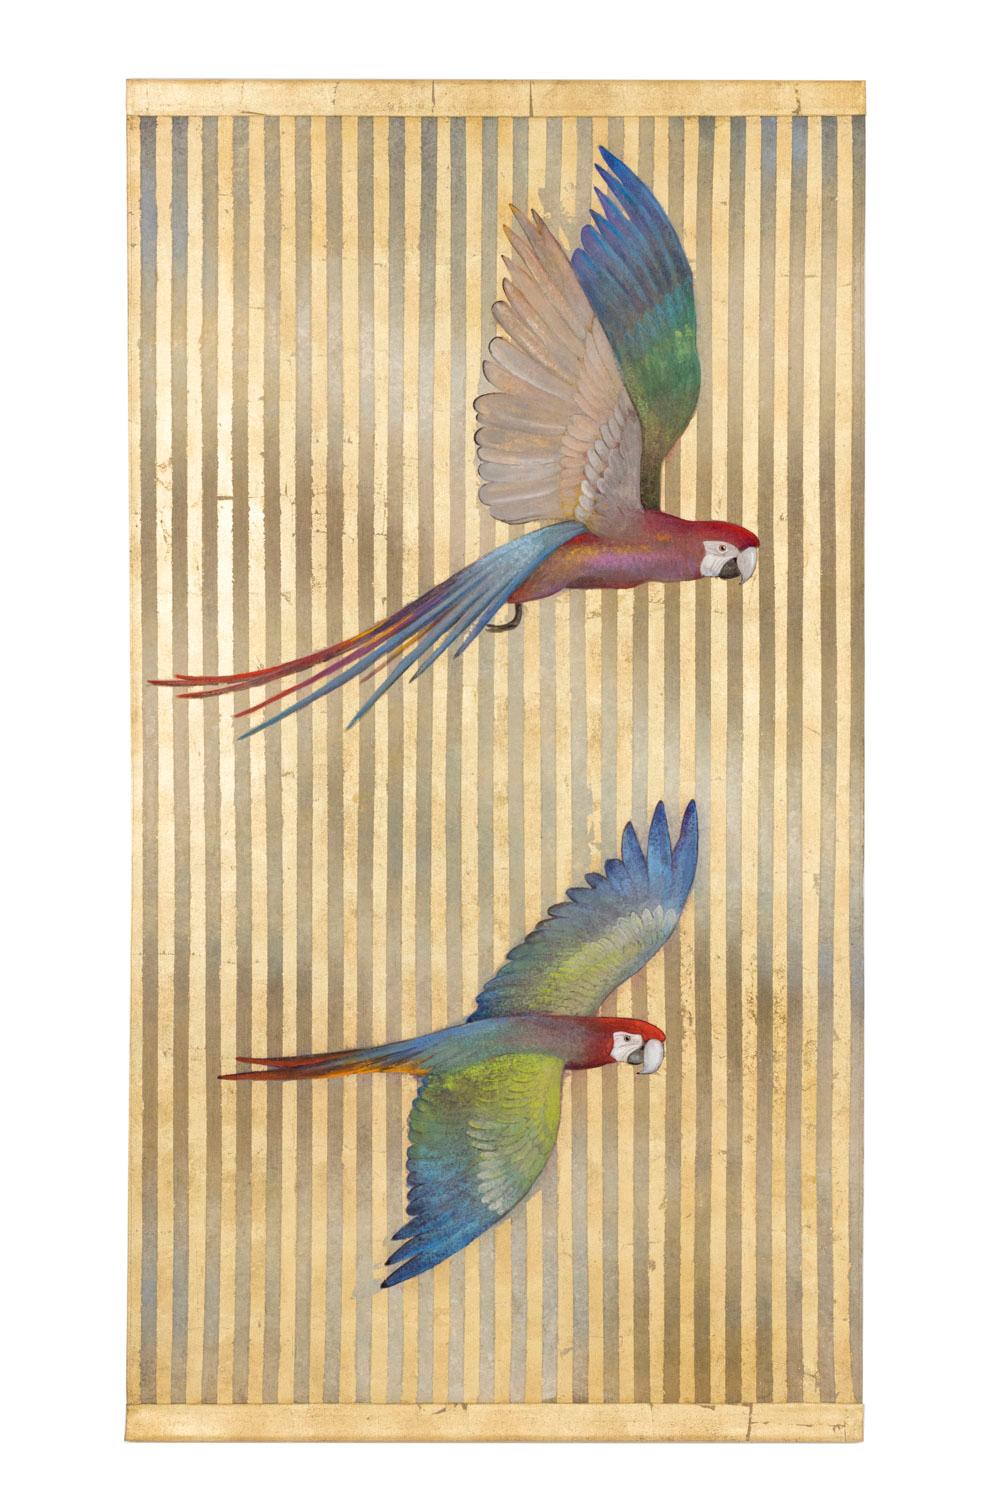 Painted canvas figuring two flying multicolored parrots on a gilt and brown striped background.

Linen raw canvas hand painted with natural pigments and background gilt with copper leaf. Canvas stretched thanks to two wood sticks and the lower one